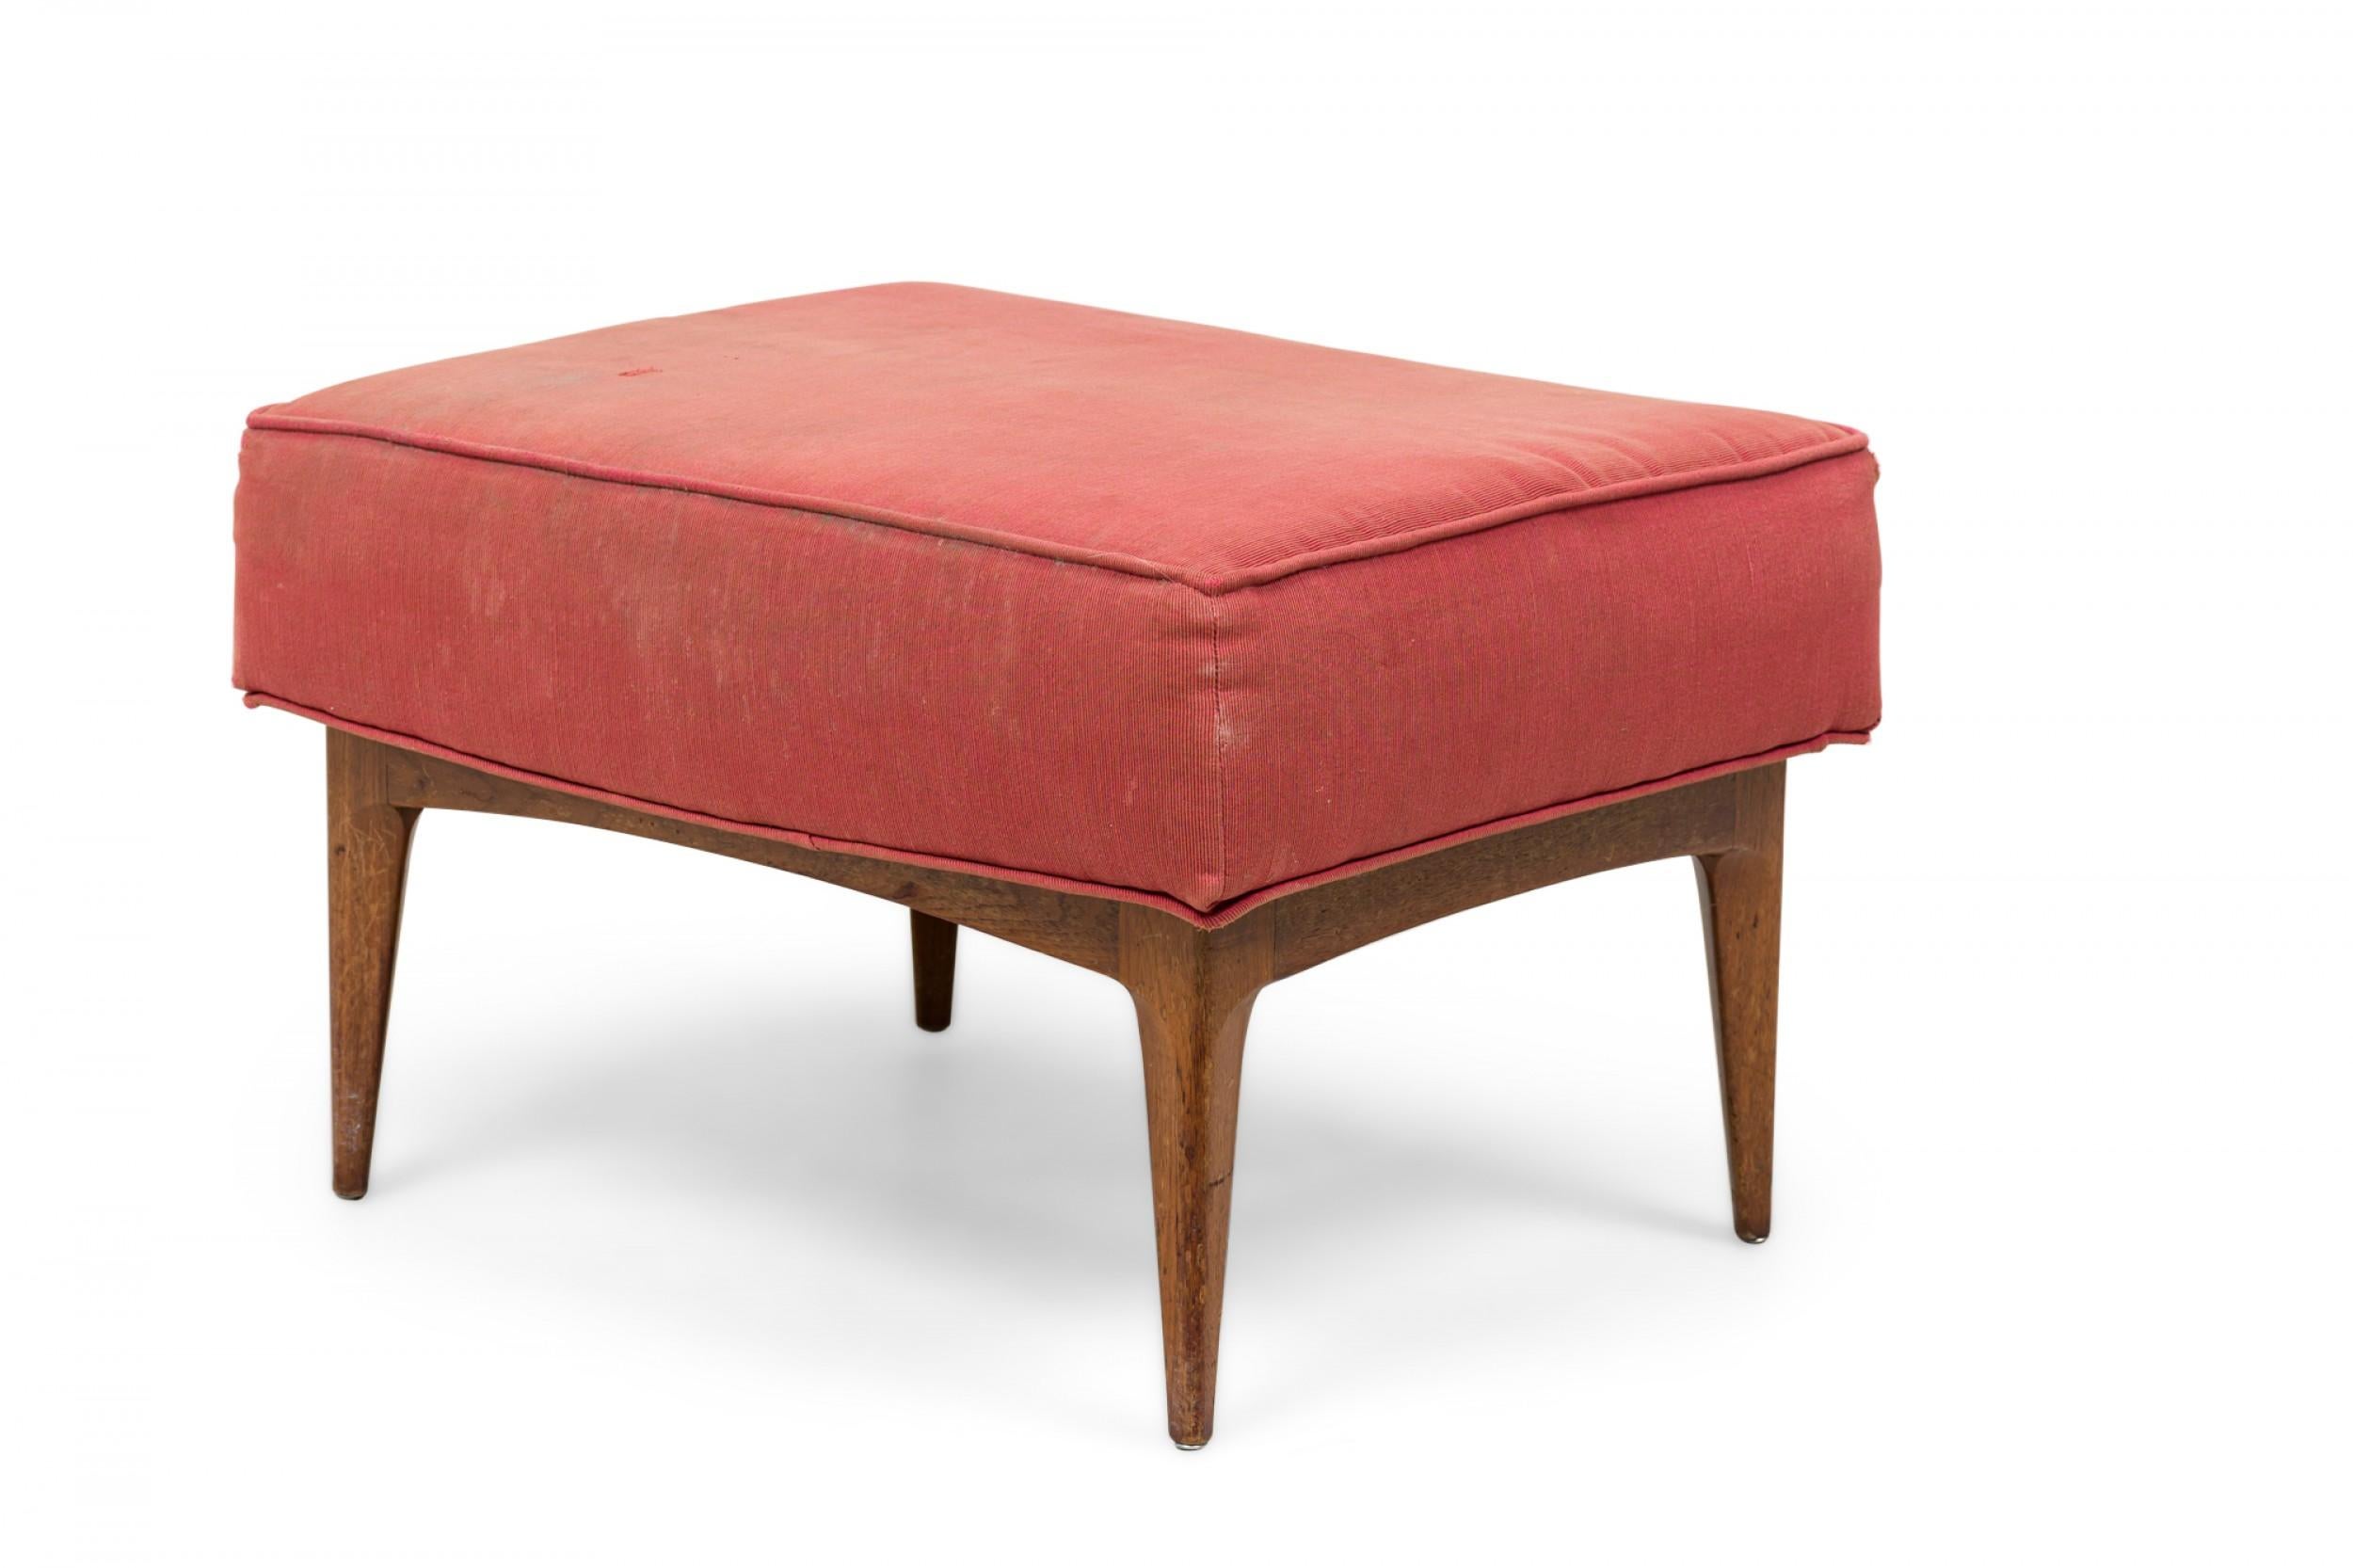 Midcentury Italian walnut rectangular ottoman with muted red fabric upholstered seat and piping, standing on four tapered legs.